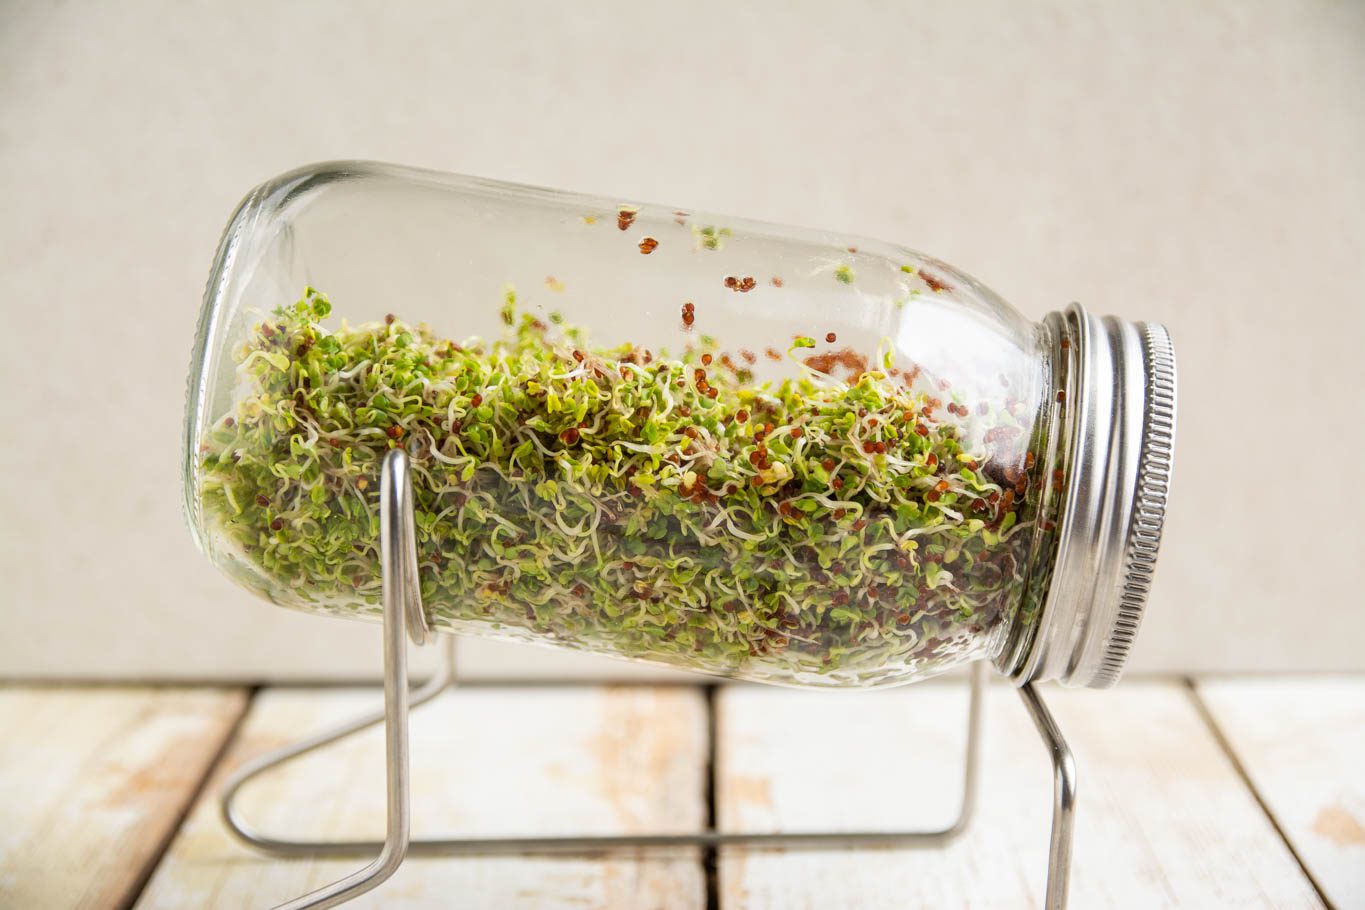 Learn how to grow broccoli sprouts in a jar at home. In addition, read up on broccoli sprouts benefits, how to store, and how to use sprouted broccoli.